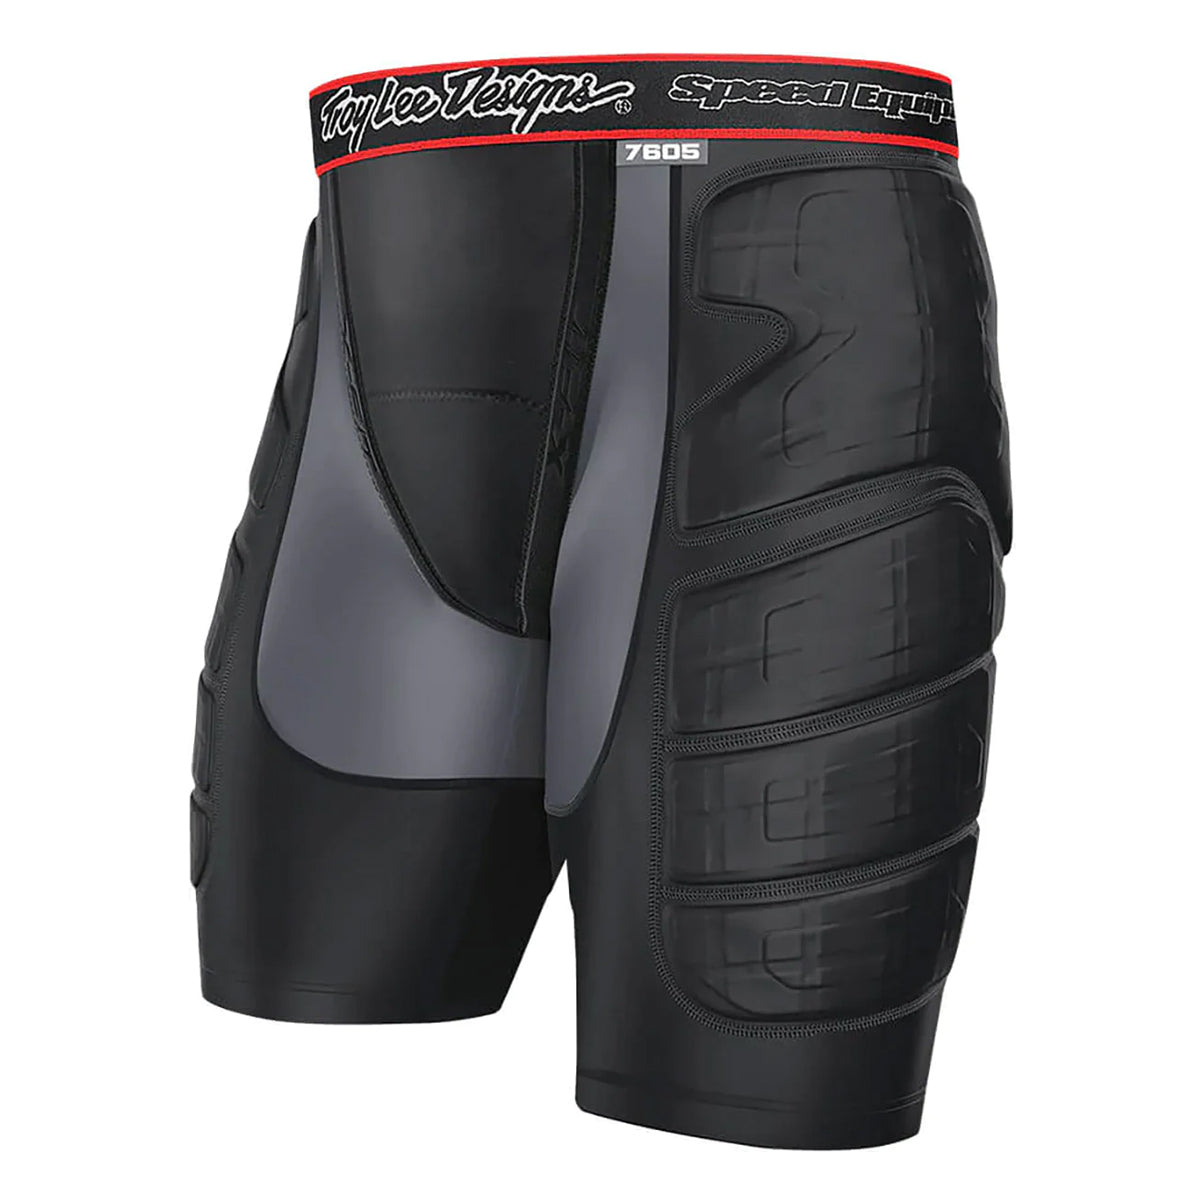 Troy Lee Designs LPS7605 Base Layer Short Adult Off-Road Body Armor